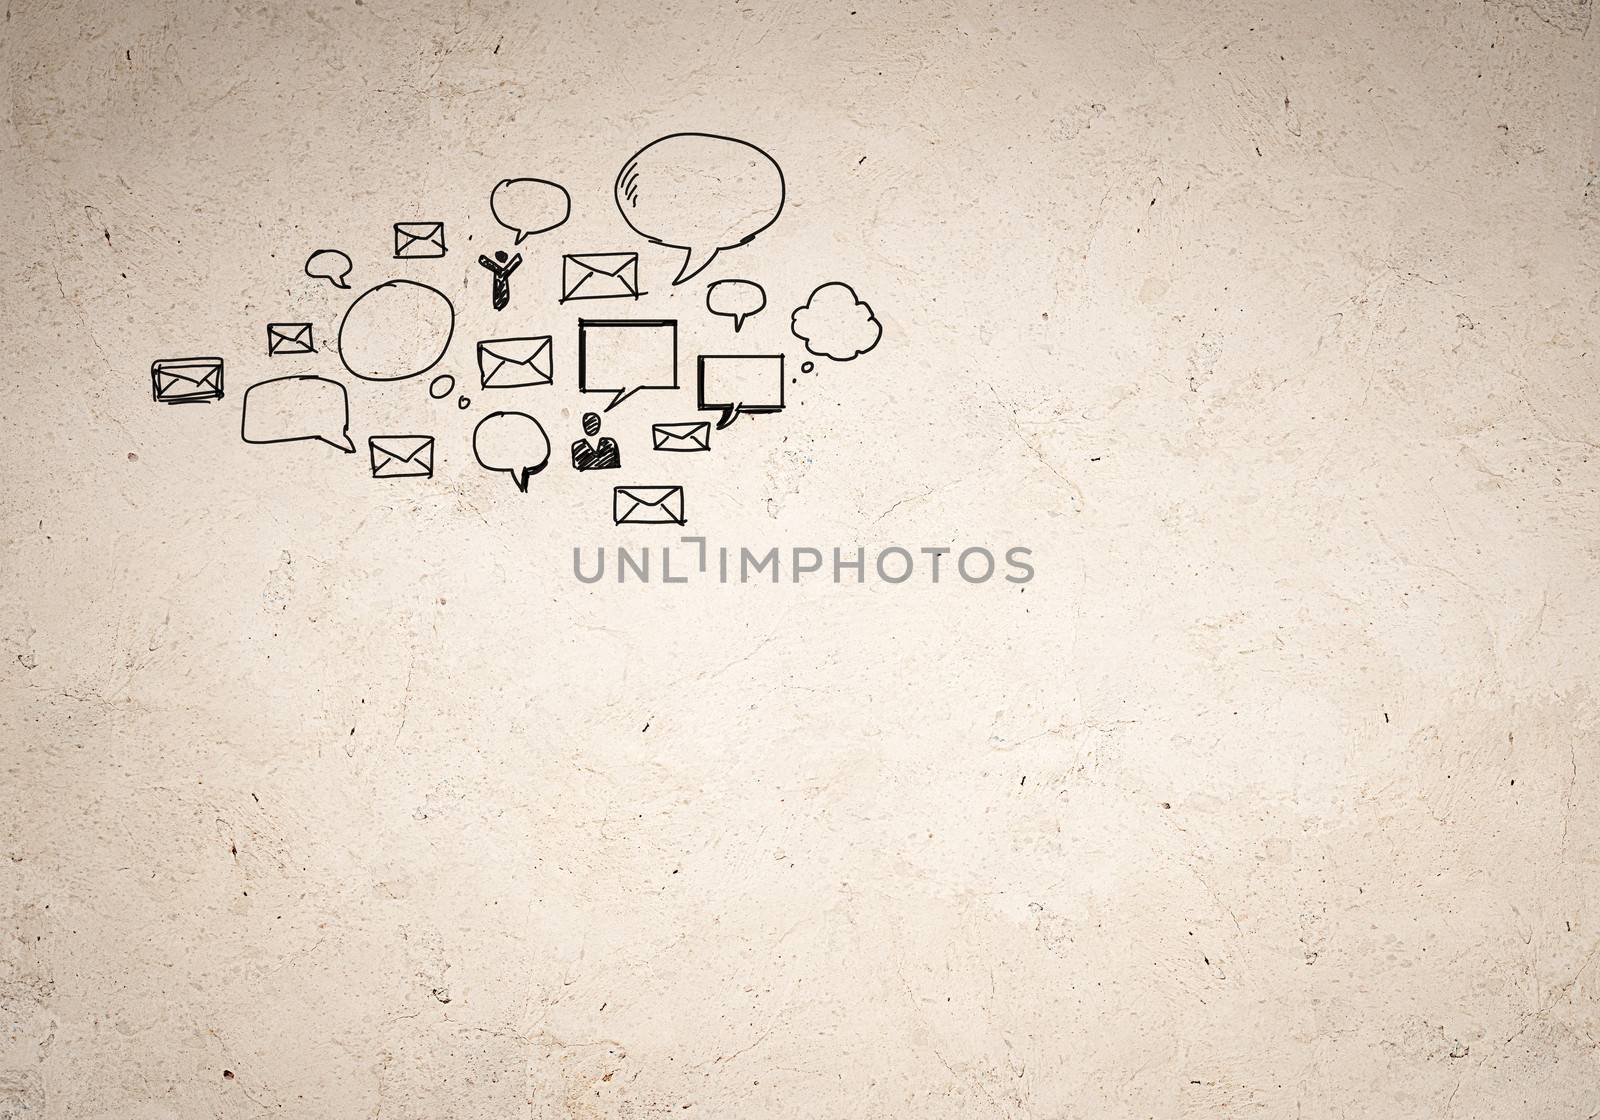 Business background image with drawn ideas and speech bubbles